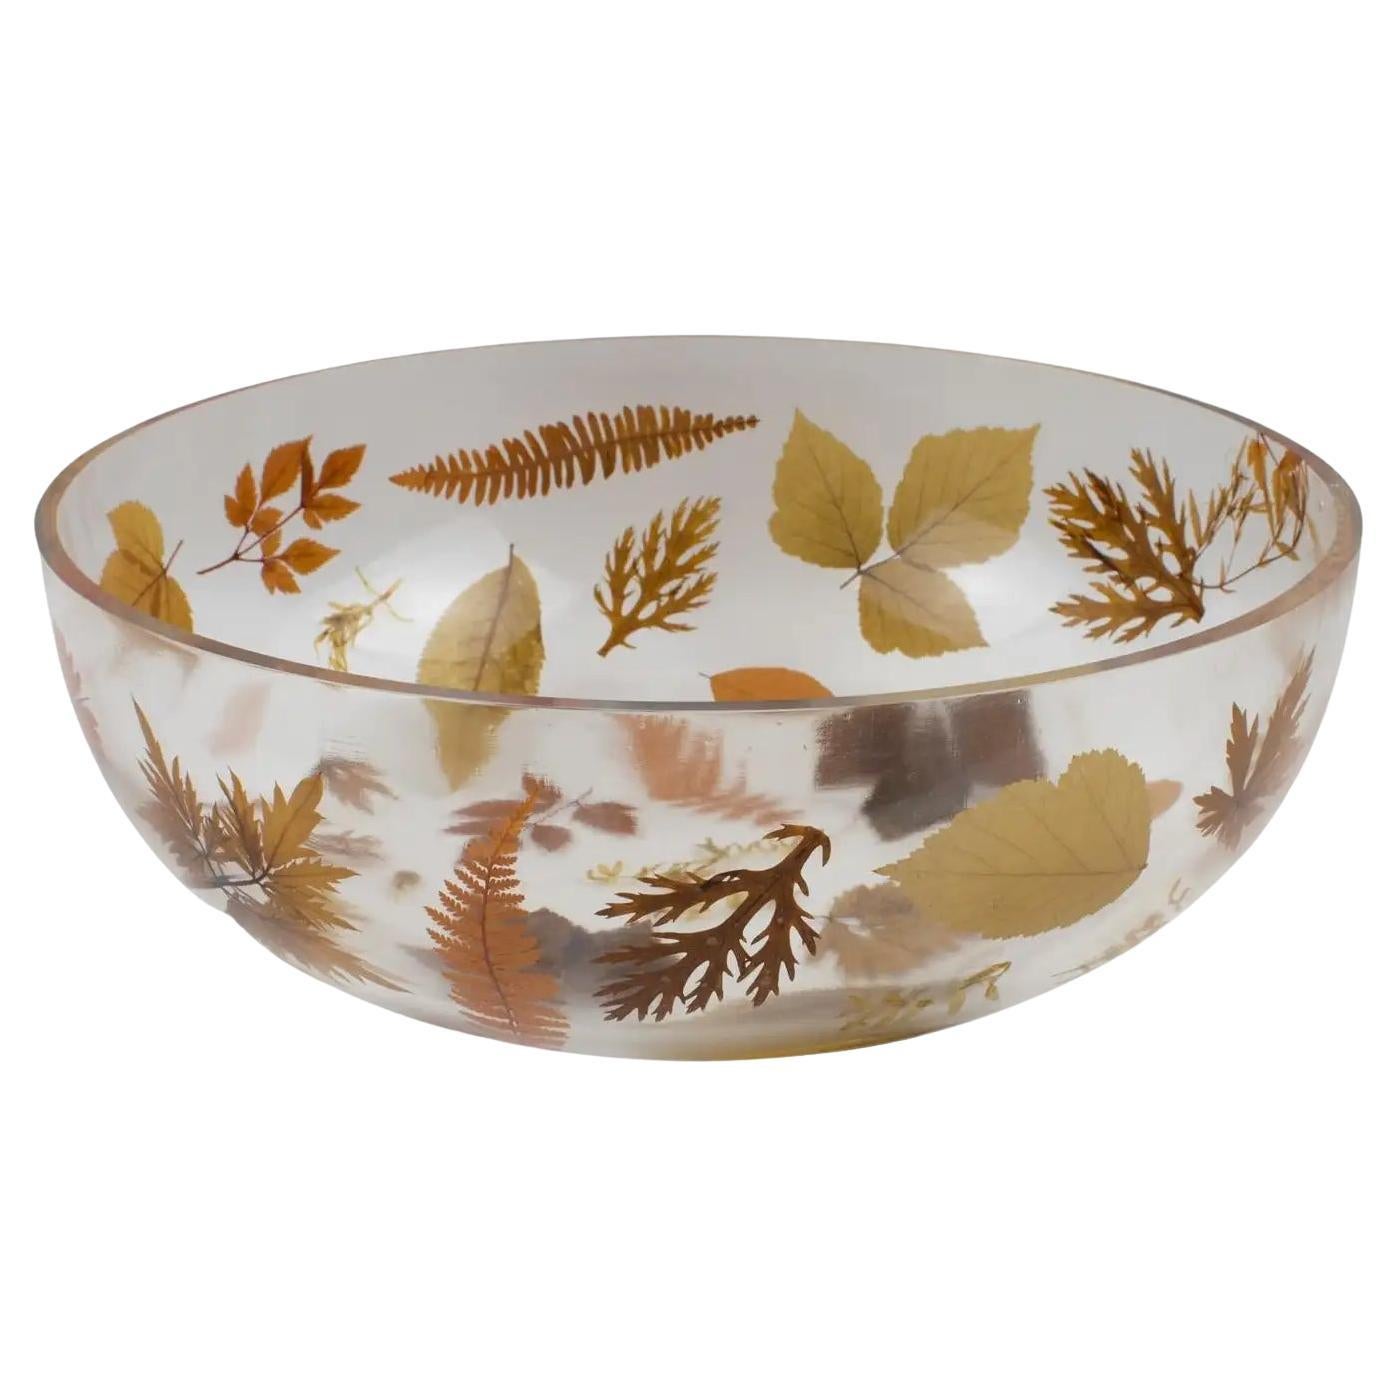 Italian Resin Centerpiece Bowl with Leaves and Flowers Inclusions For Sale